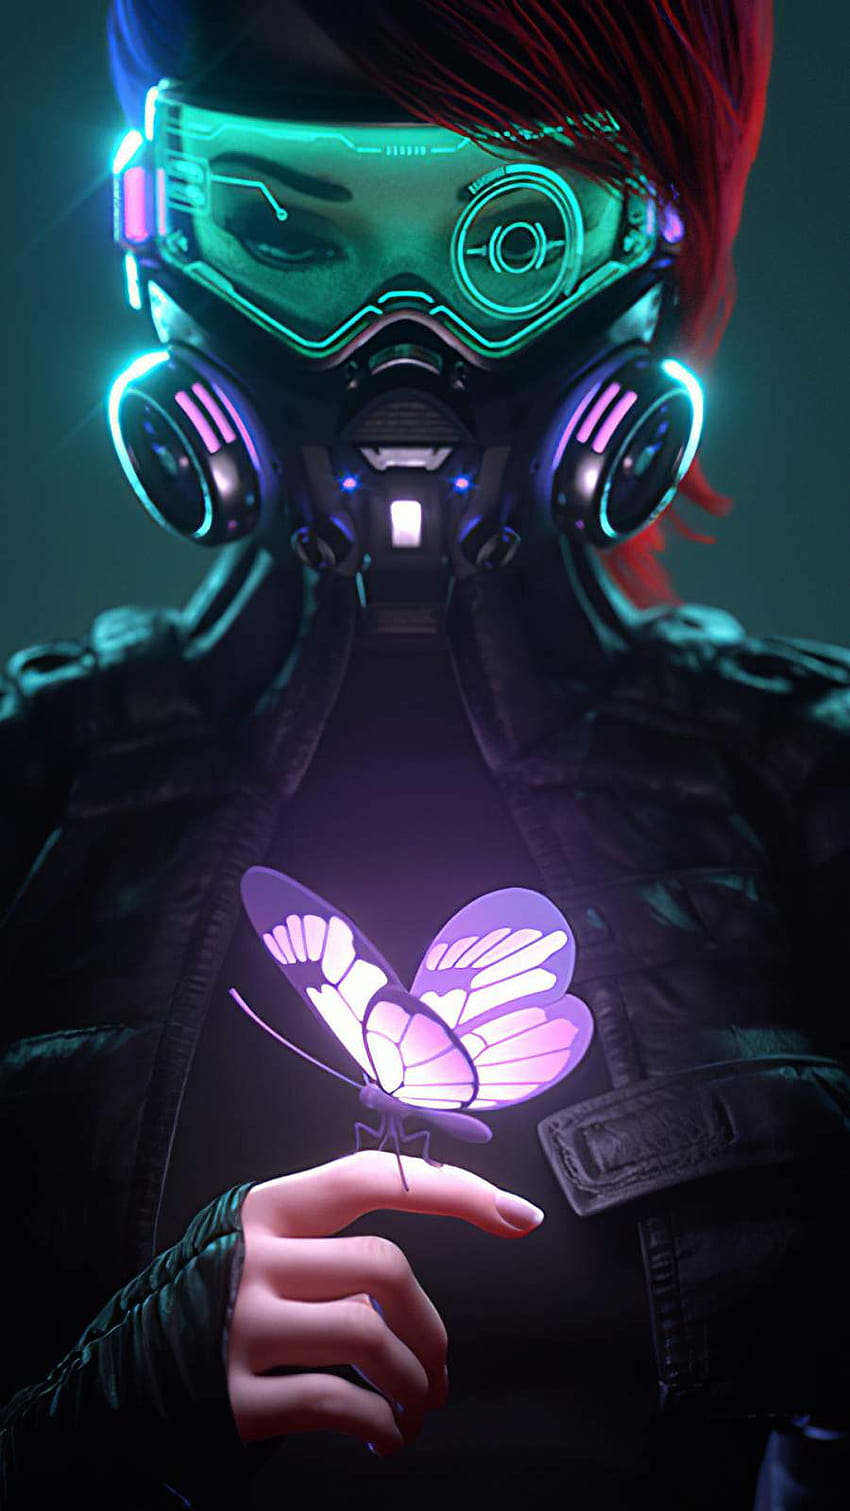 Cyber​​punk Girl In A Gas Mask Looking At The Glowing Butterfly IPhone, iphone サイバーパンク HD電話の壁紙